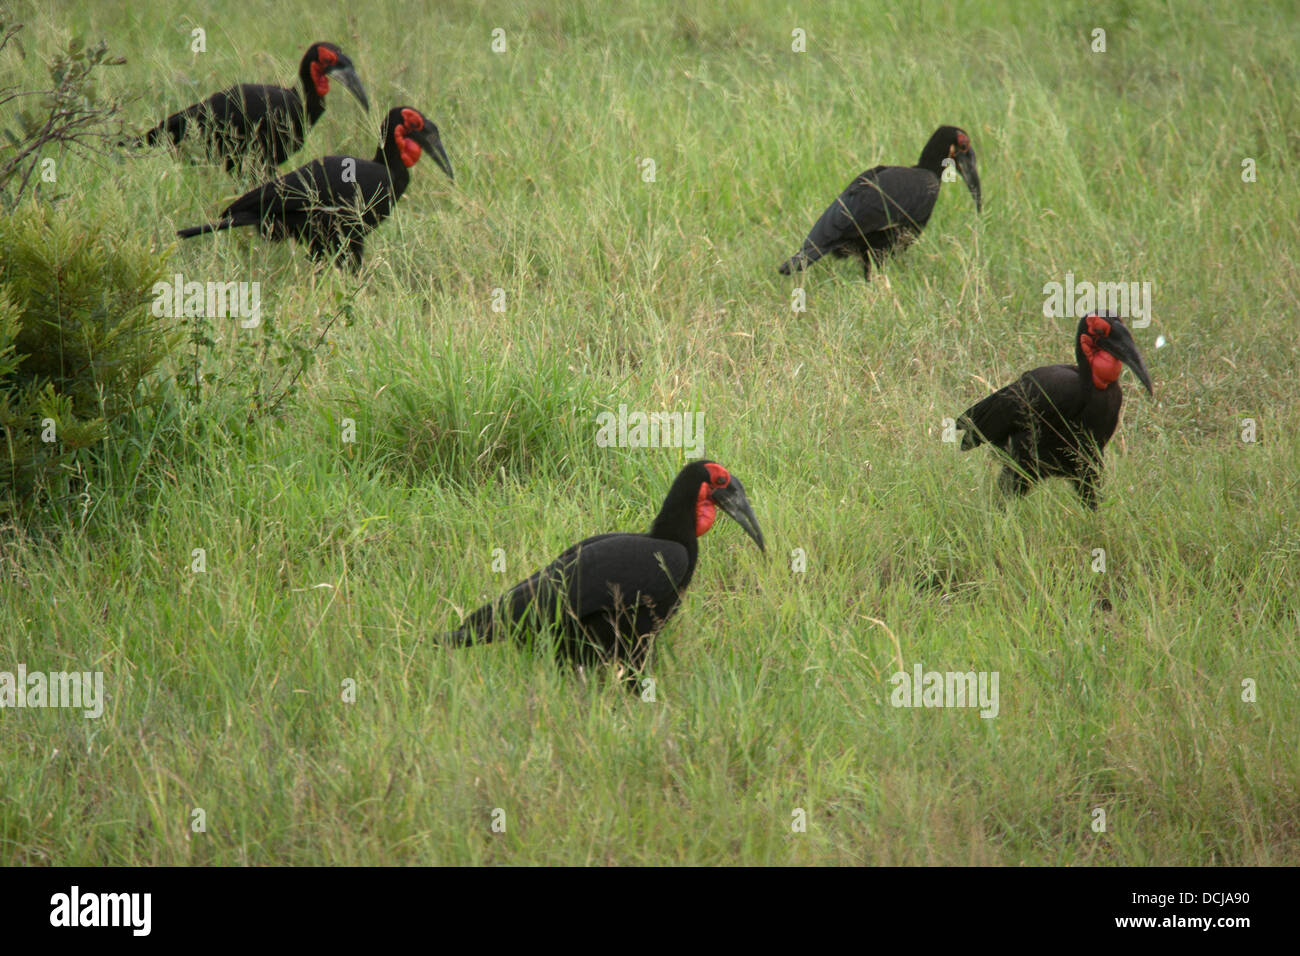 A family of Ground Hornbills searching for food Stock Photo